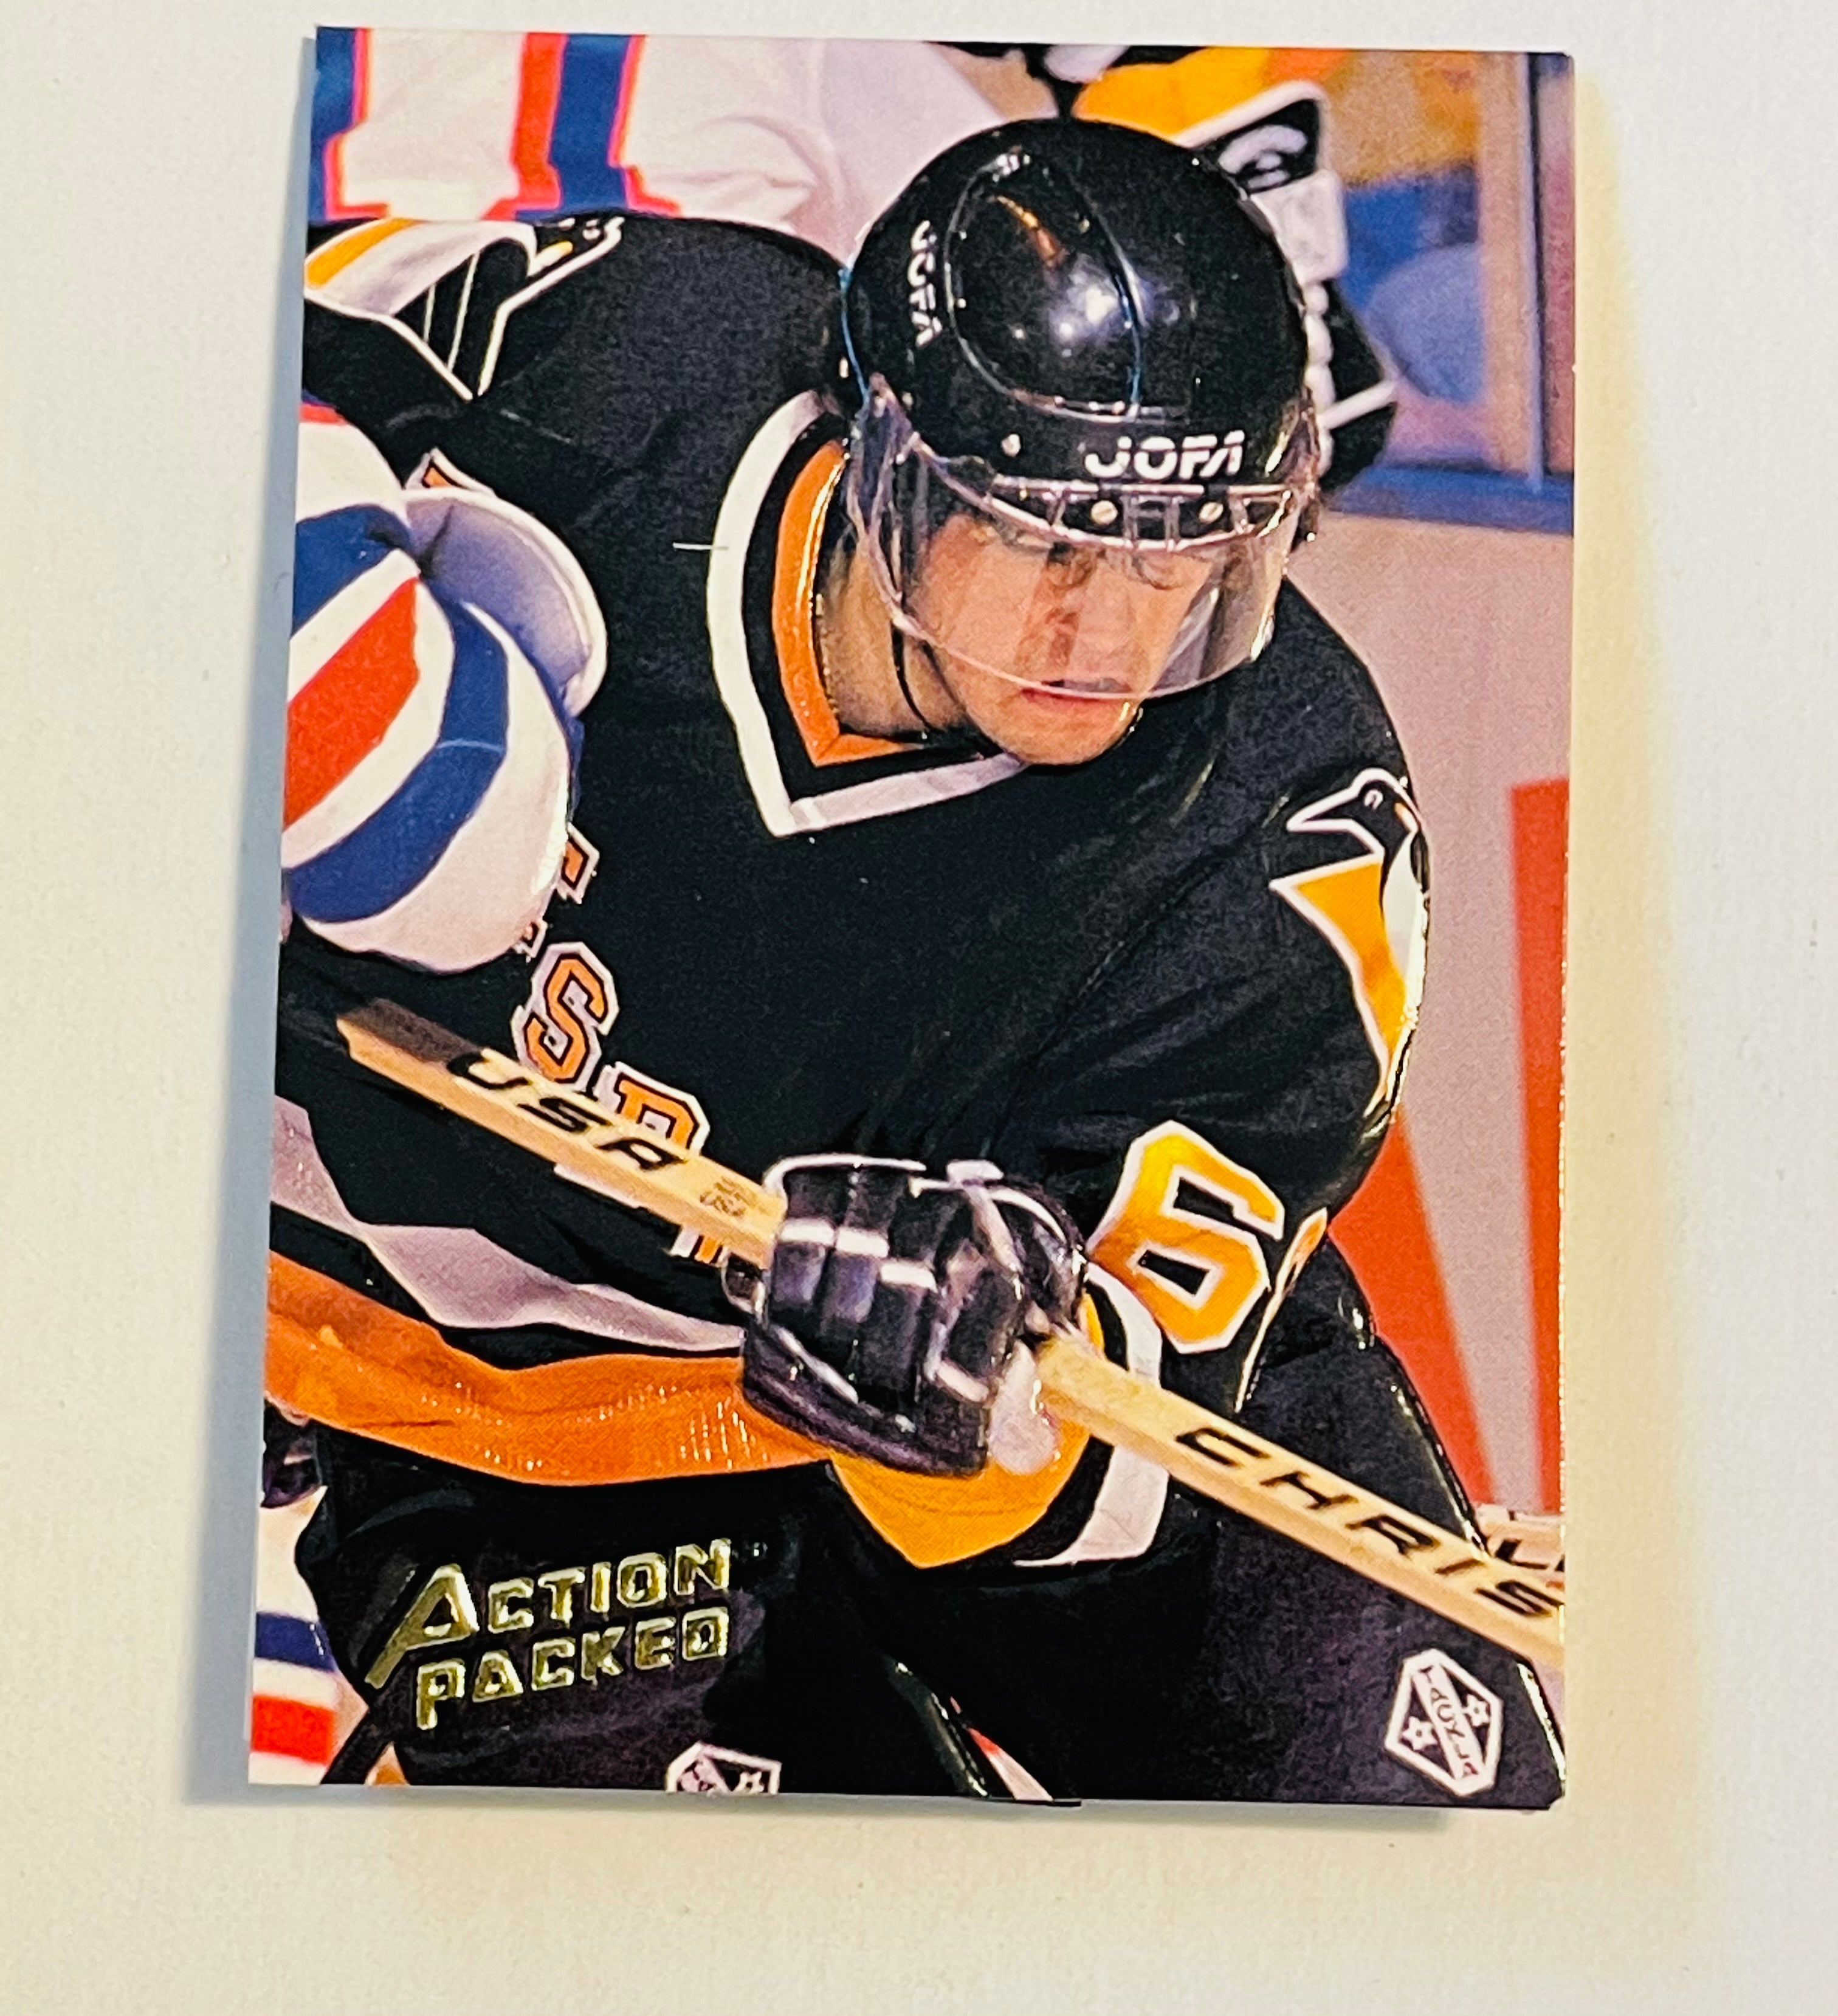 Jaromir Jagr rare Action Packed test issued hockey card 1994